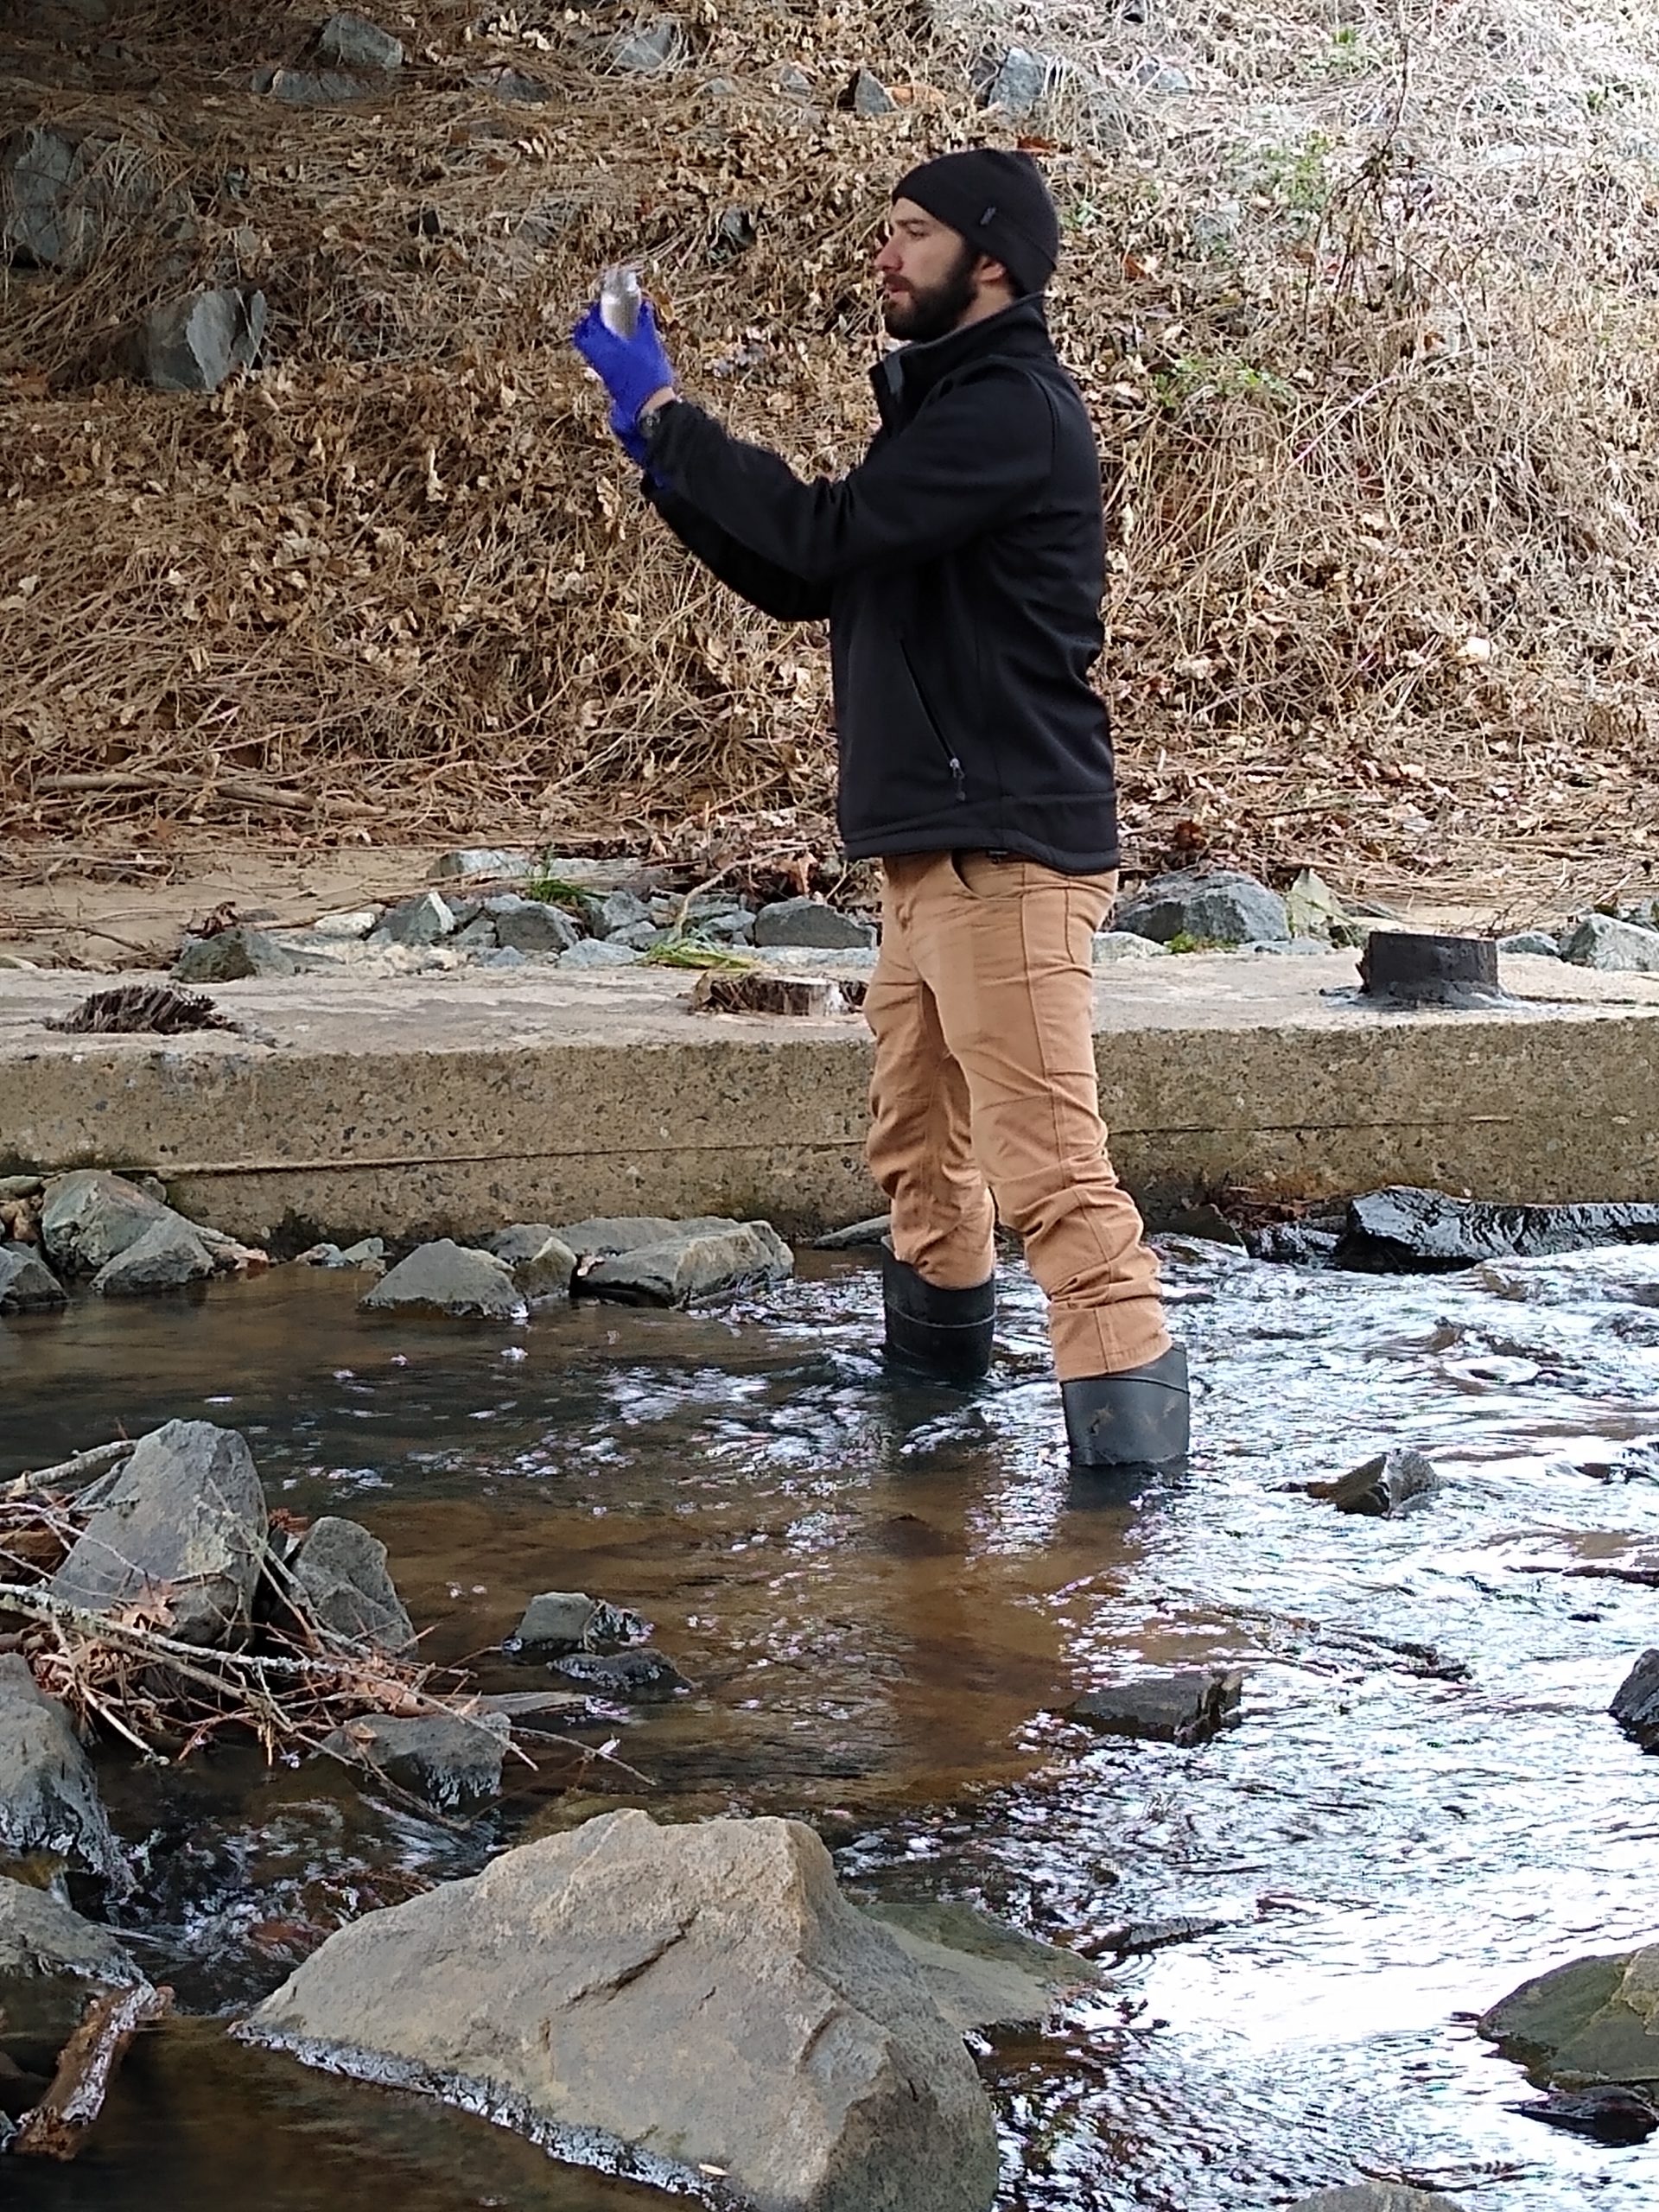 A man is standing in a river, with knee high boots on to protect from the water, holding a clear jar to collect a sample of water.